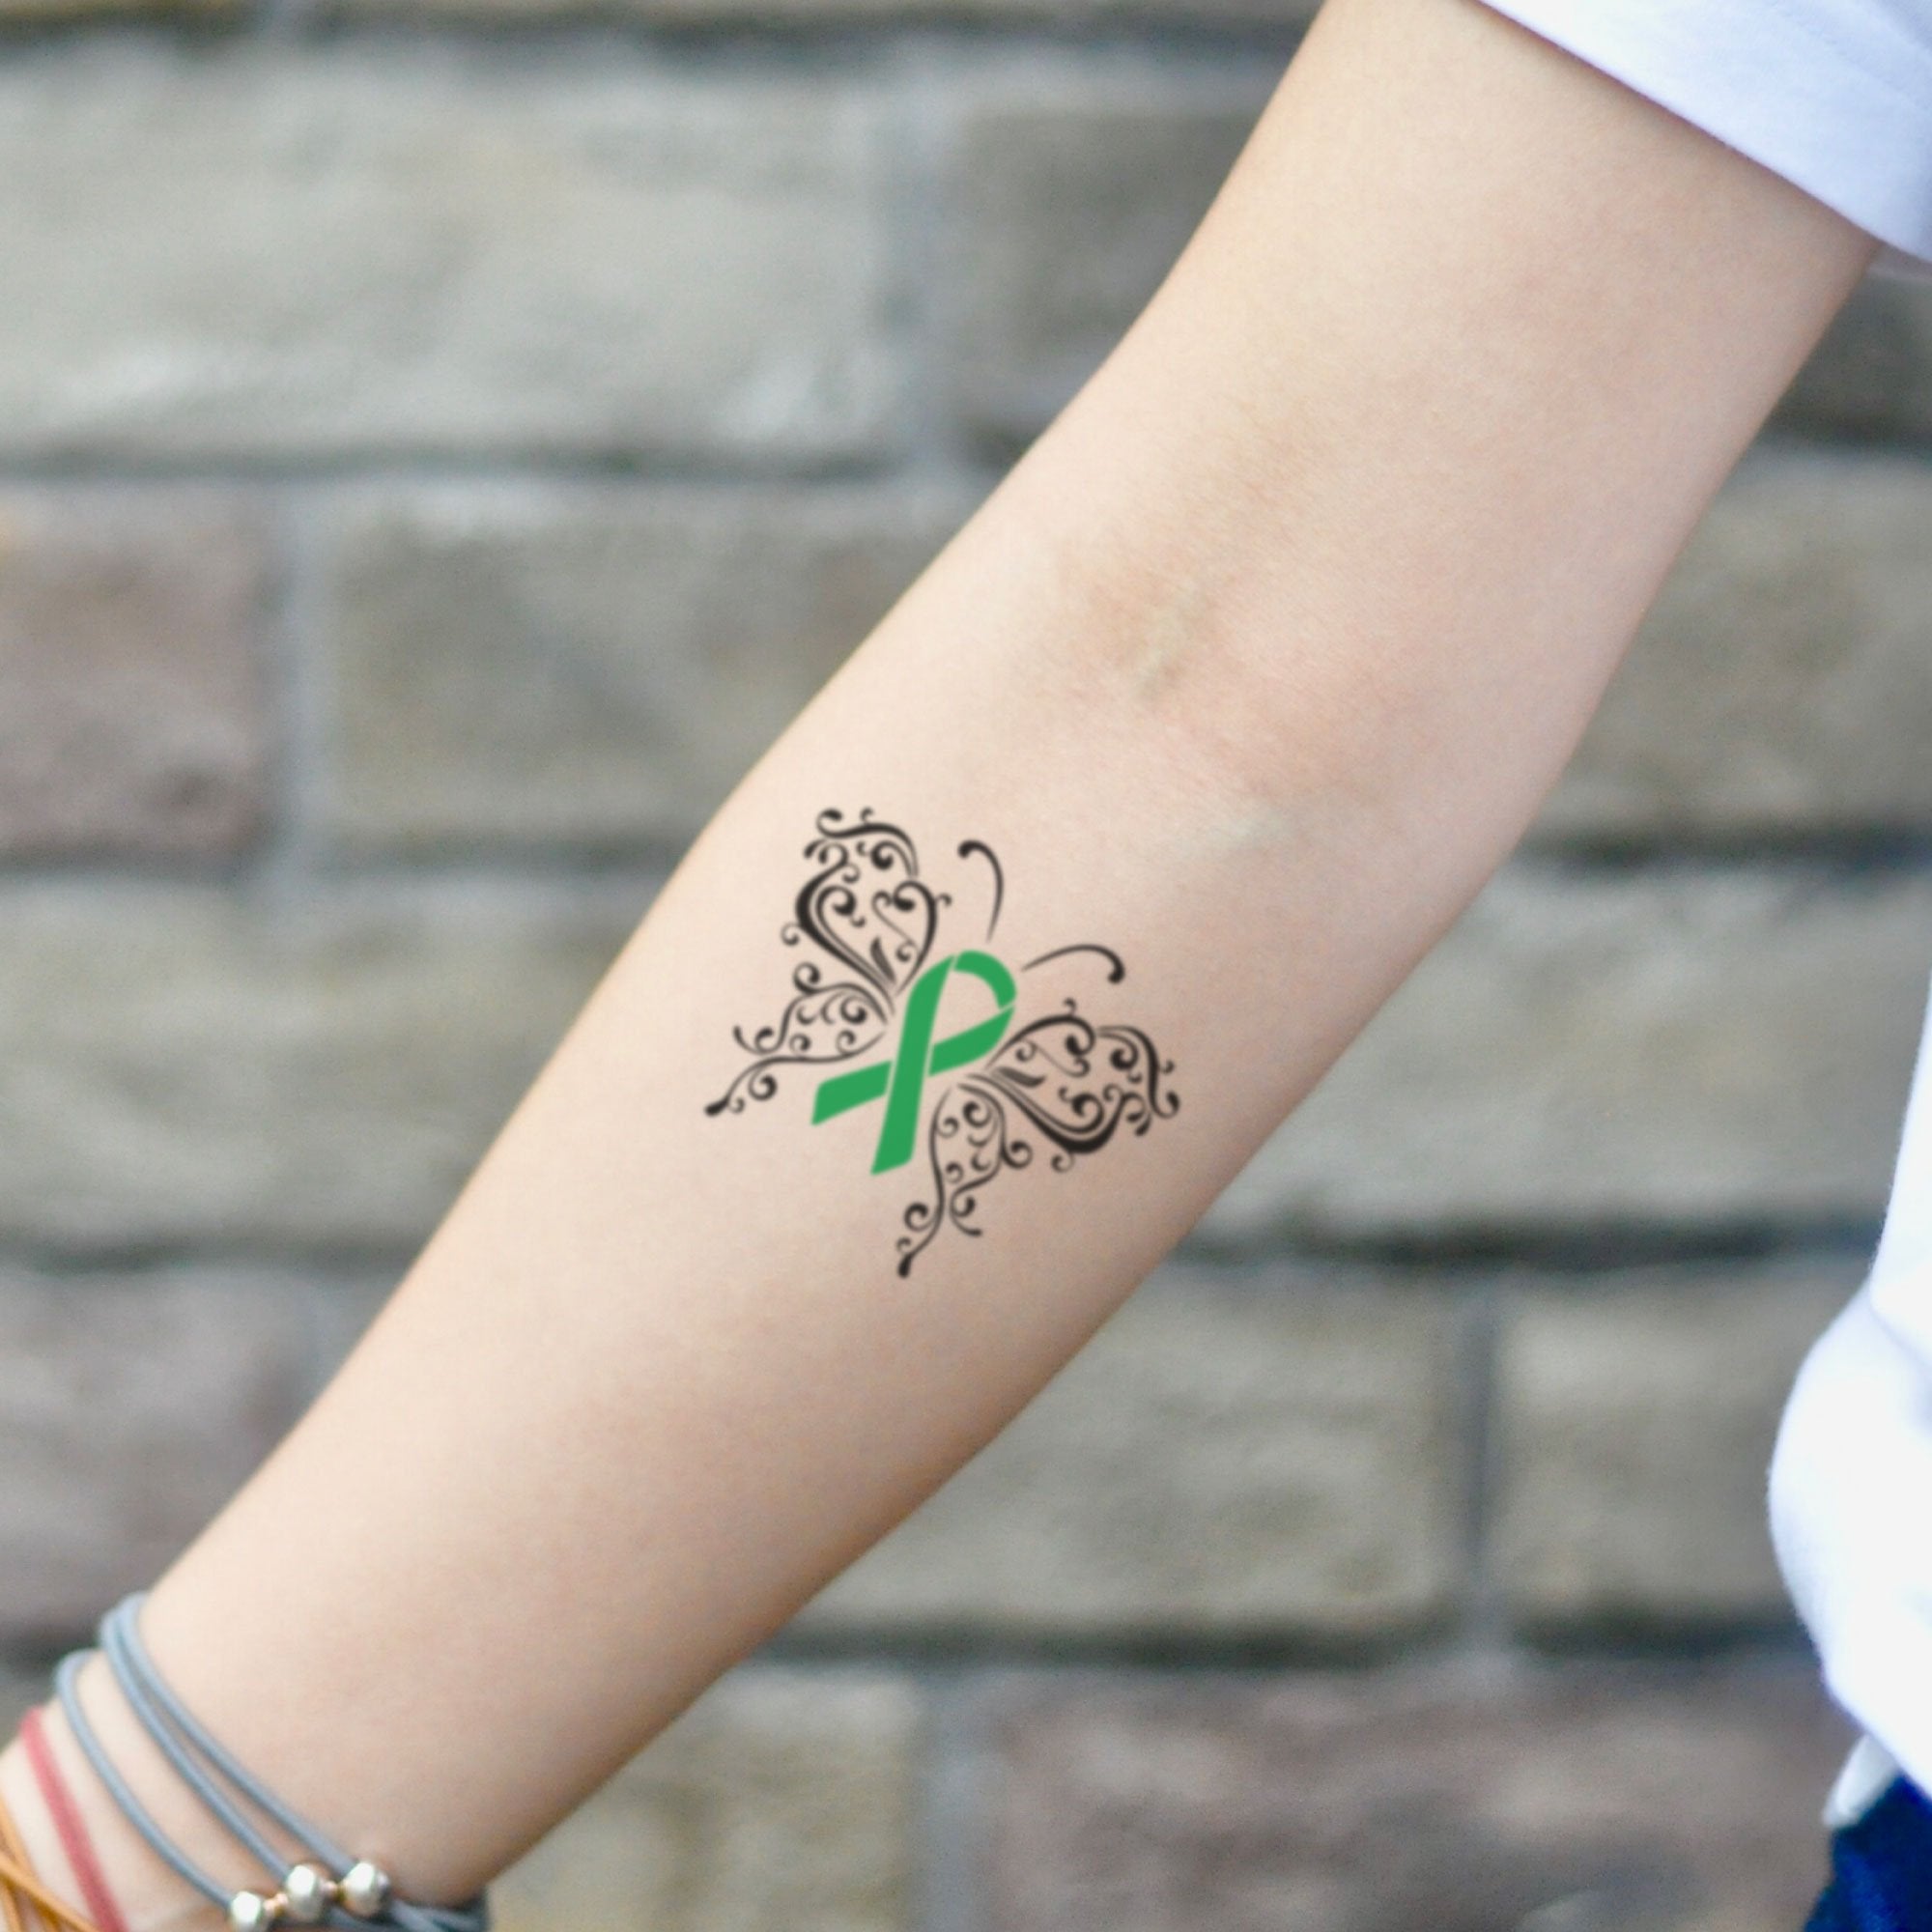 Using Tattoo Ink to Find Cancer - USC Viterbi | School of Engineering